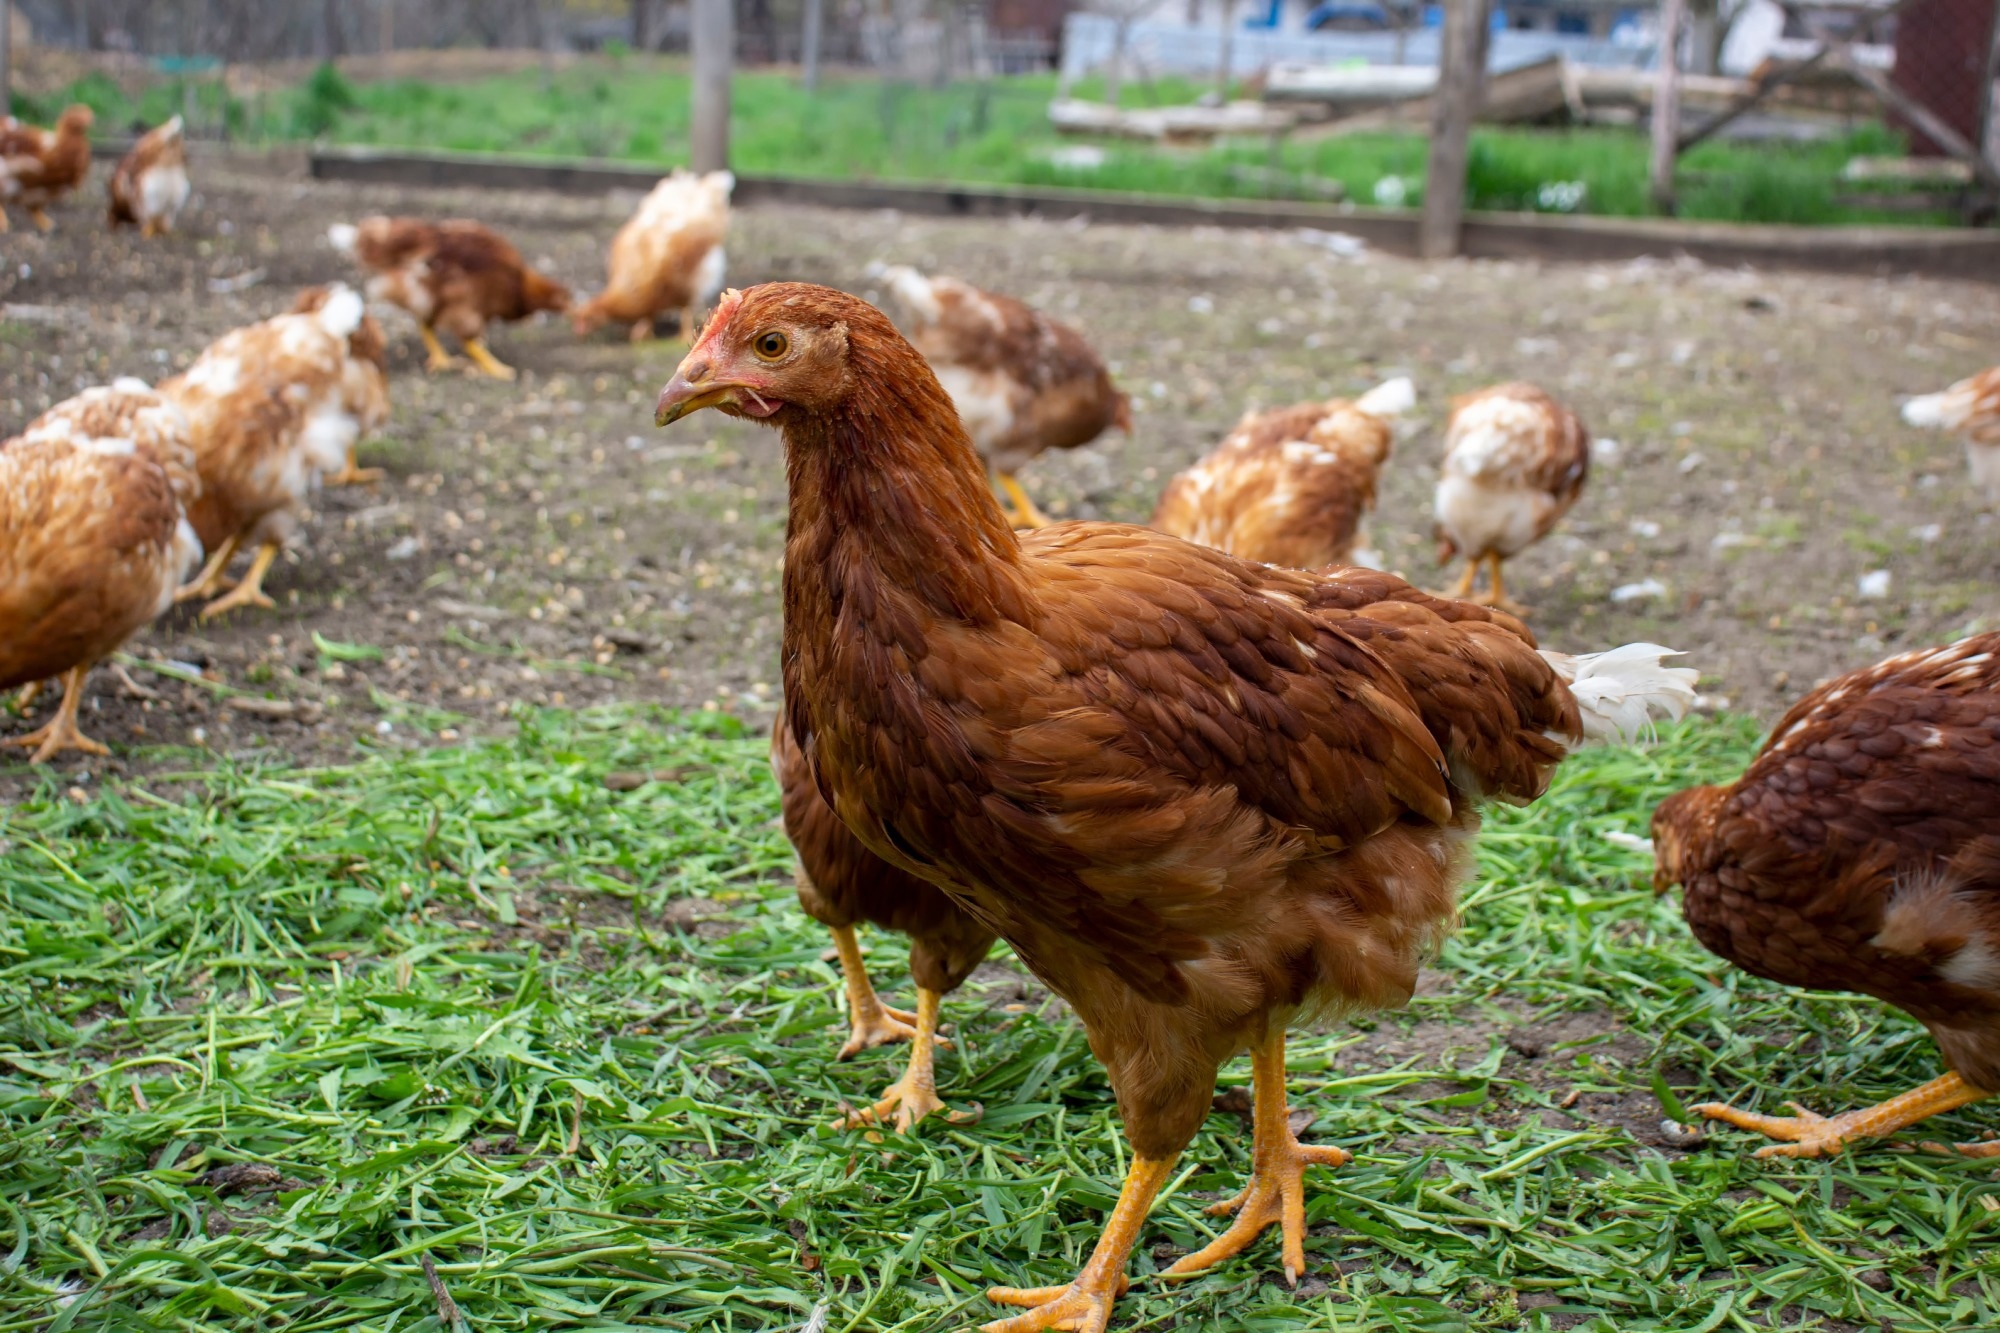 Study: Human infection caused by avian influenza A(H5) - Ecuador. Image Credit: malshkoff/Shutterstock